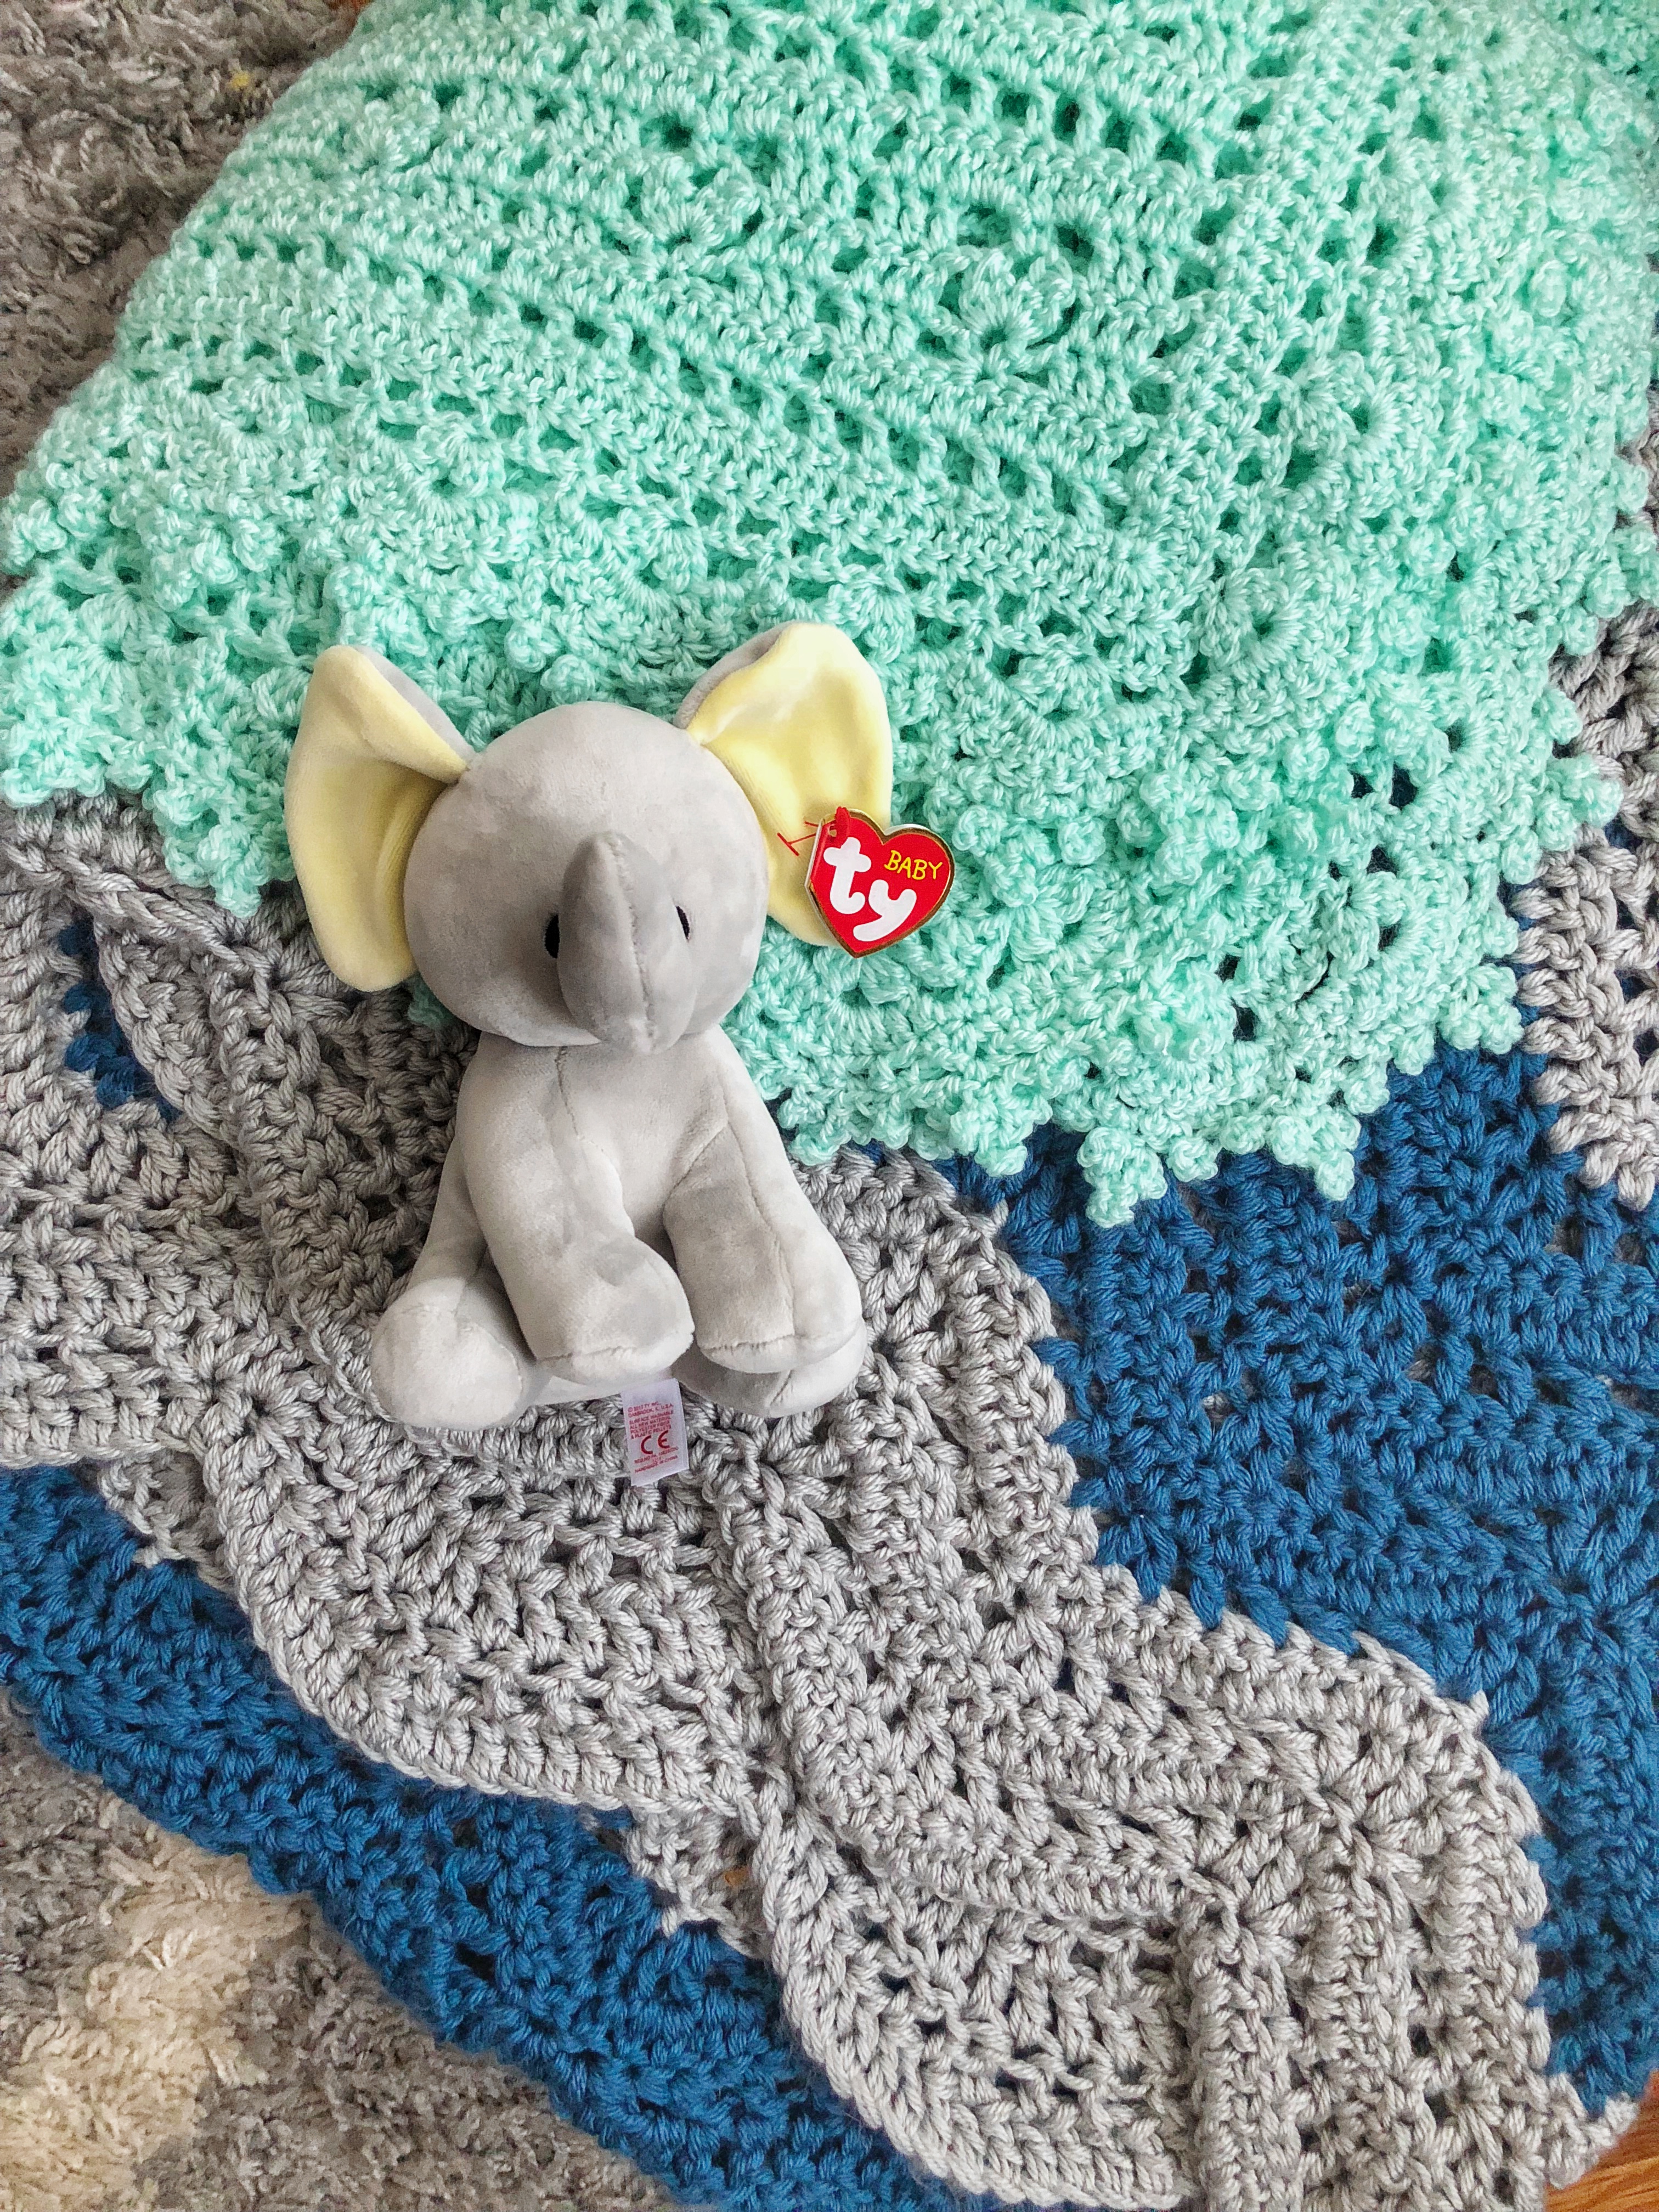 knitted blankets for baby and elephant